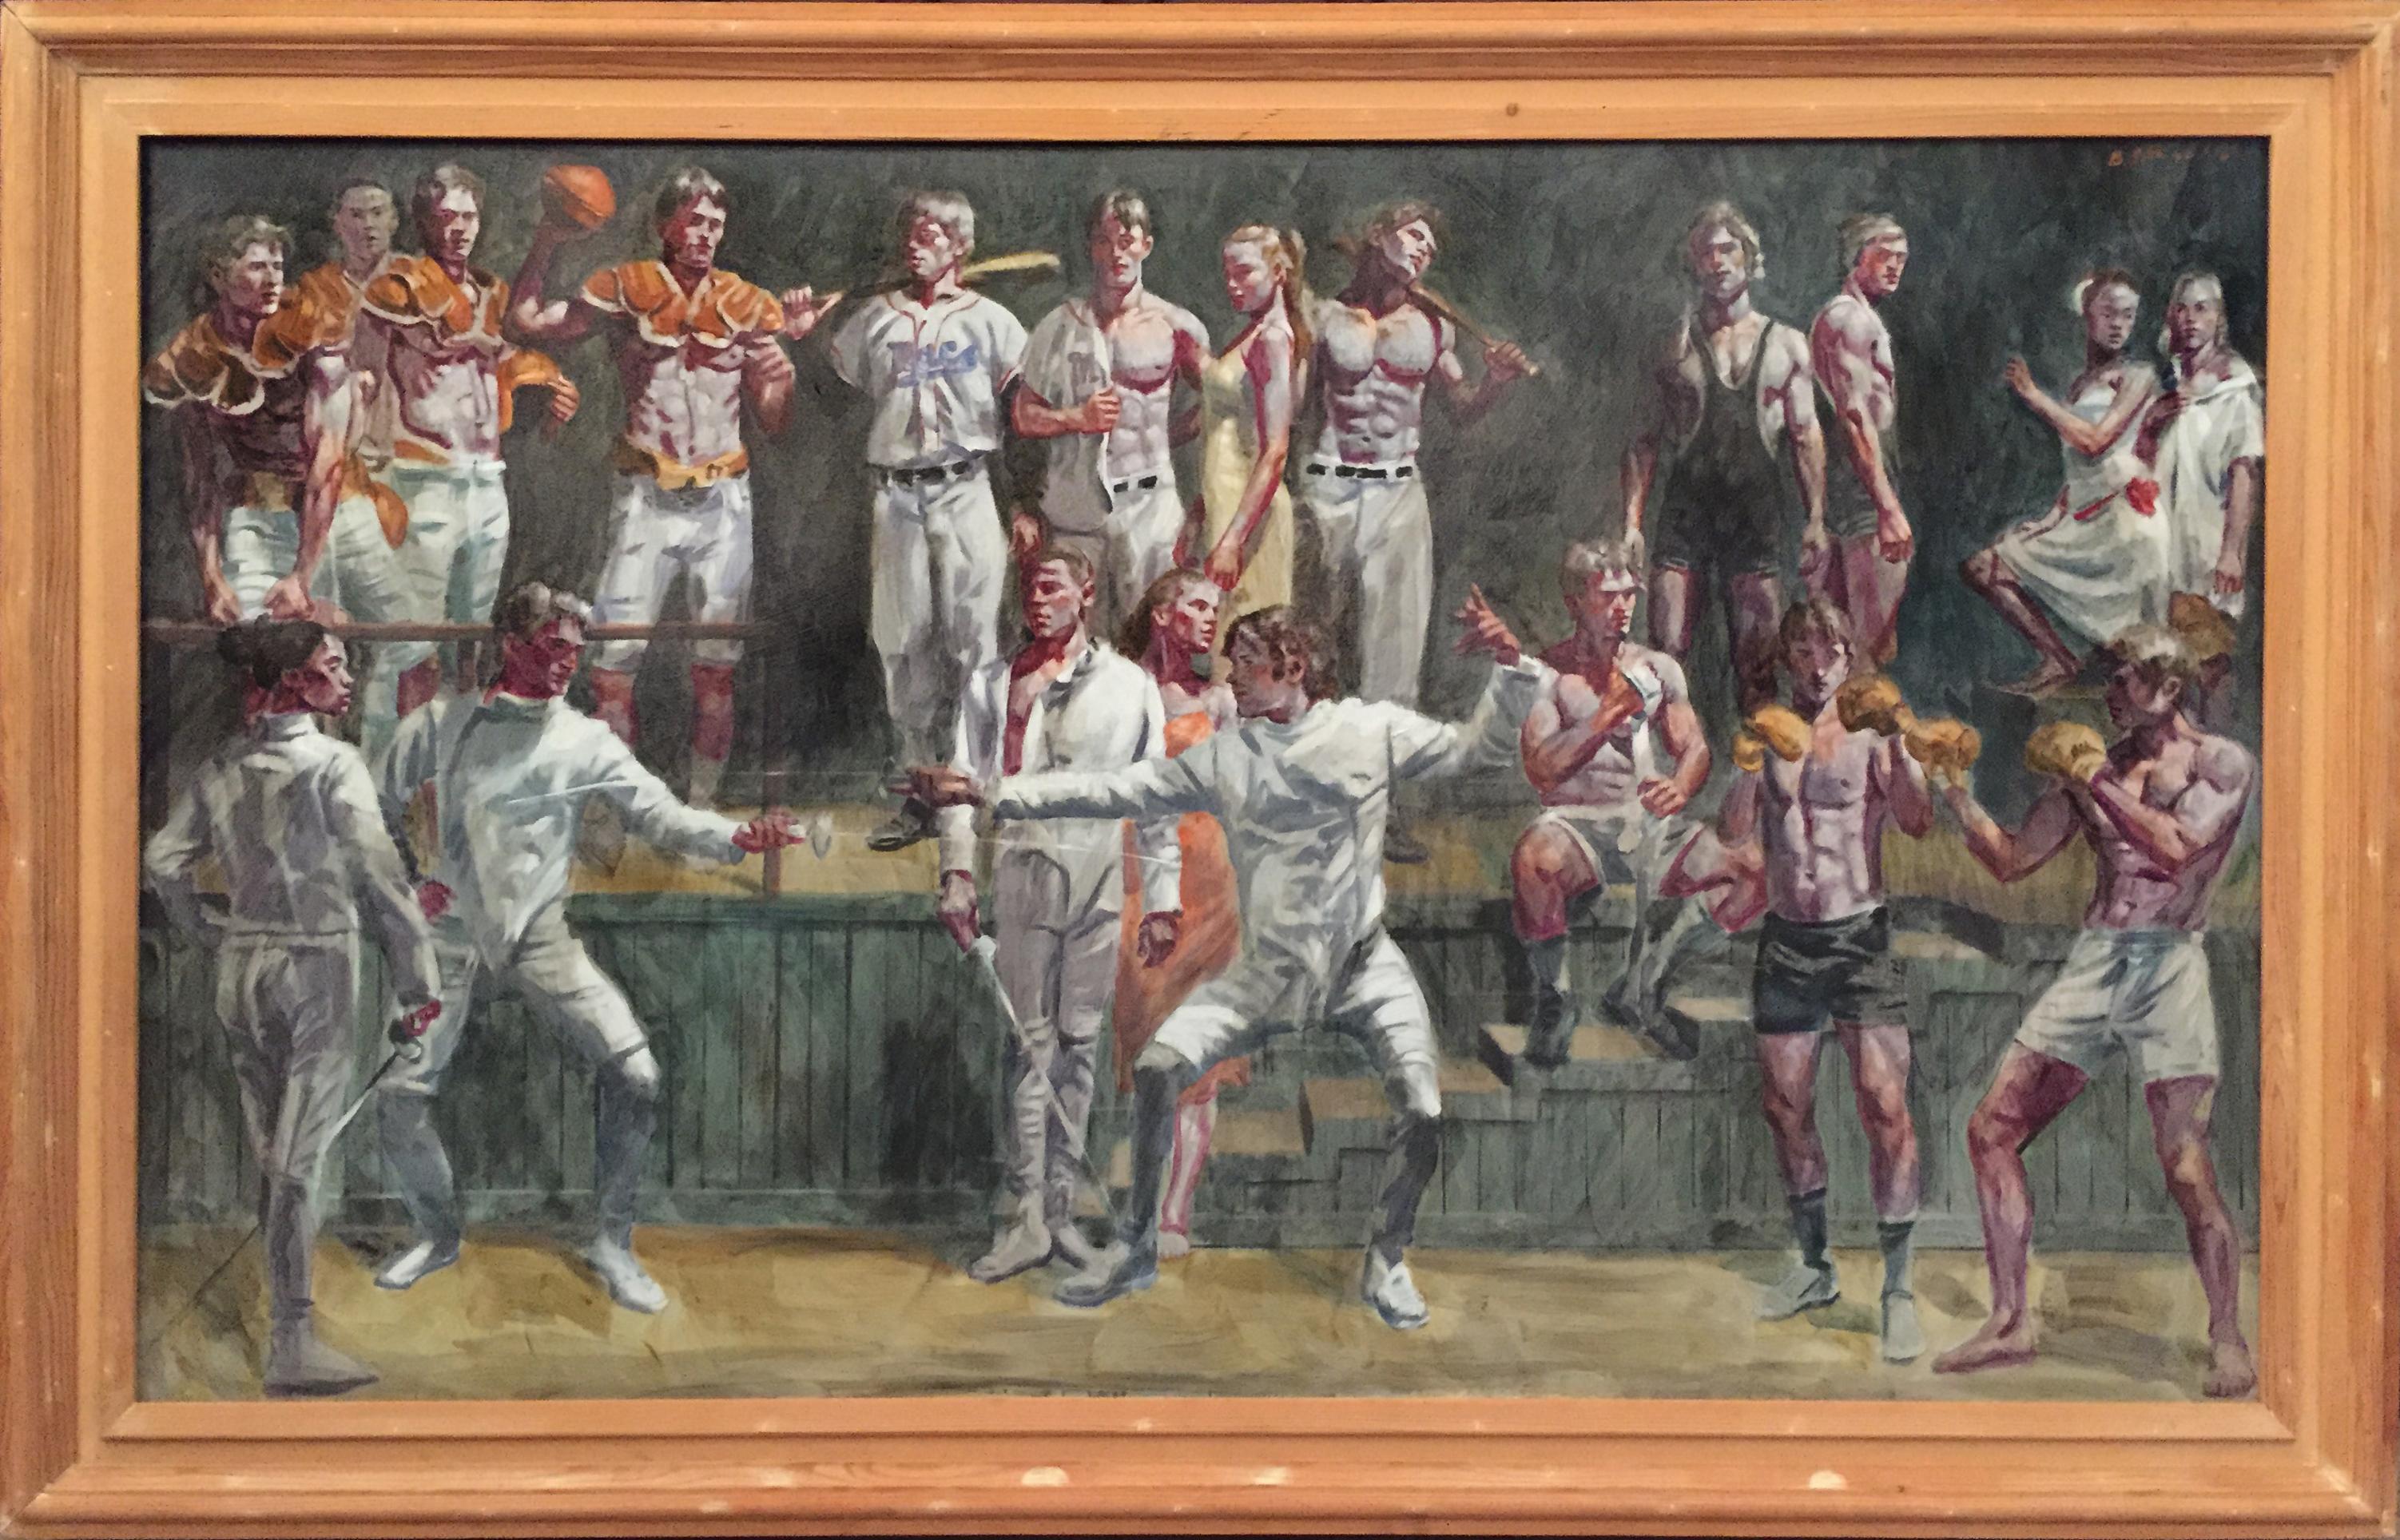 Academic style figurative painting of fencers and other young men and women in various stages of sport by Mark Beard as 'Bruce Sargeant'
Oil on canvas, 36 x 60 inches unframed, 42 x 66 inches in wood frame
Signed 'B. Sargeant' in upper right